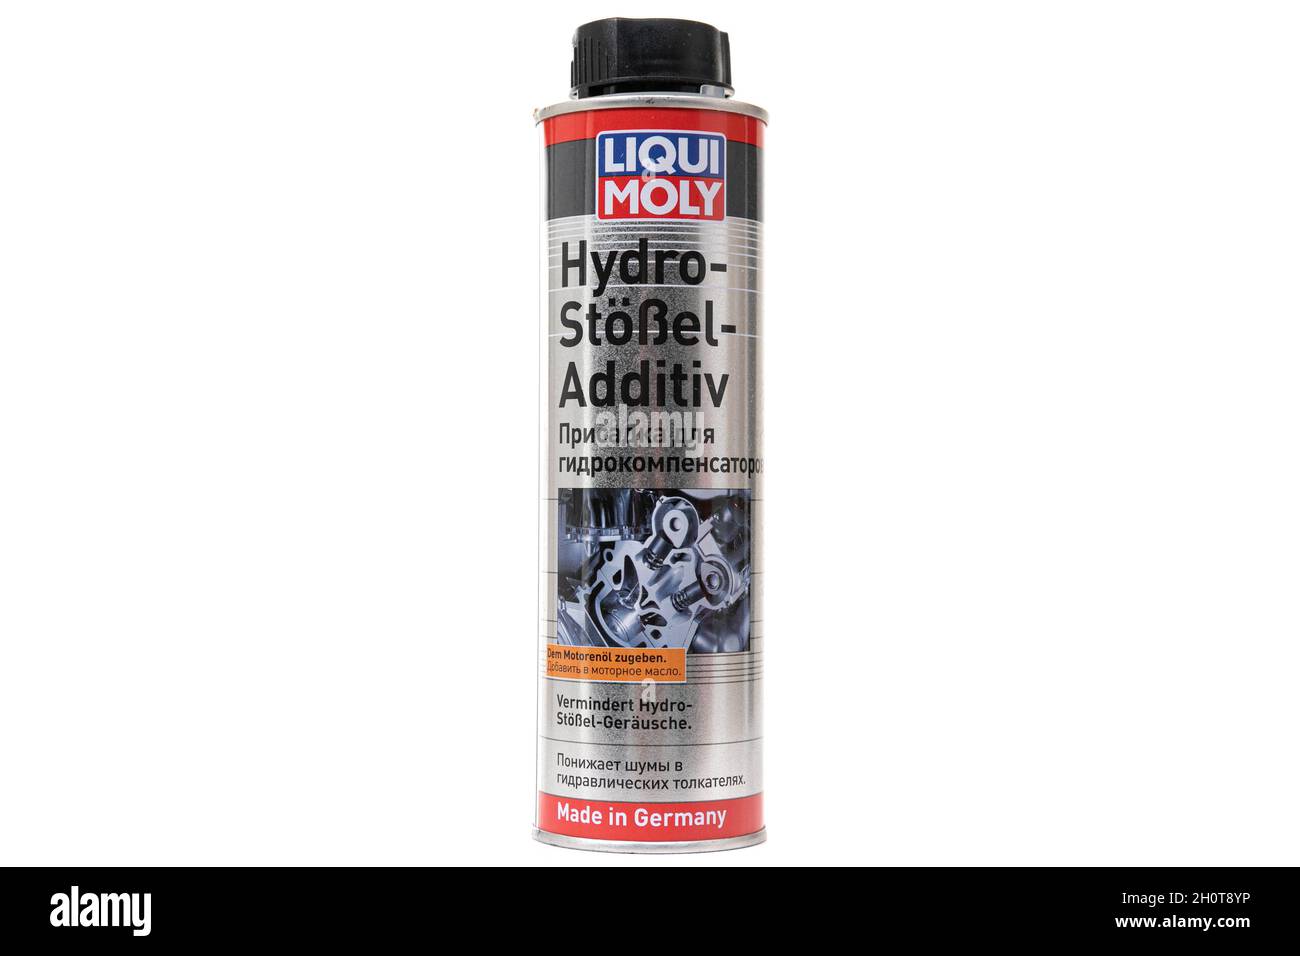 MINSK, BELARUS - OCT 14, 2021: LIQUI MOLY automotive additive in a metal  can for hydraulic lifters Stock Photo - Alamy